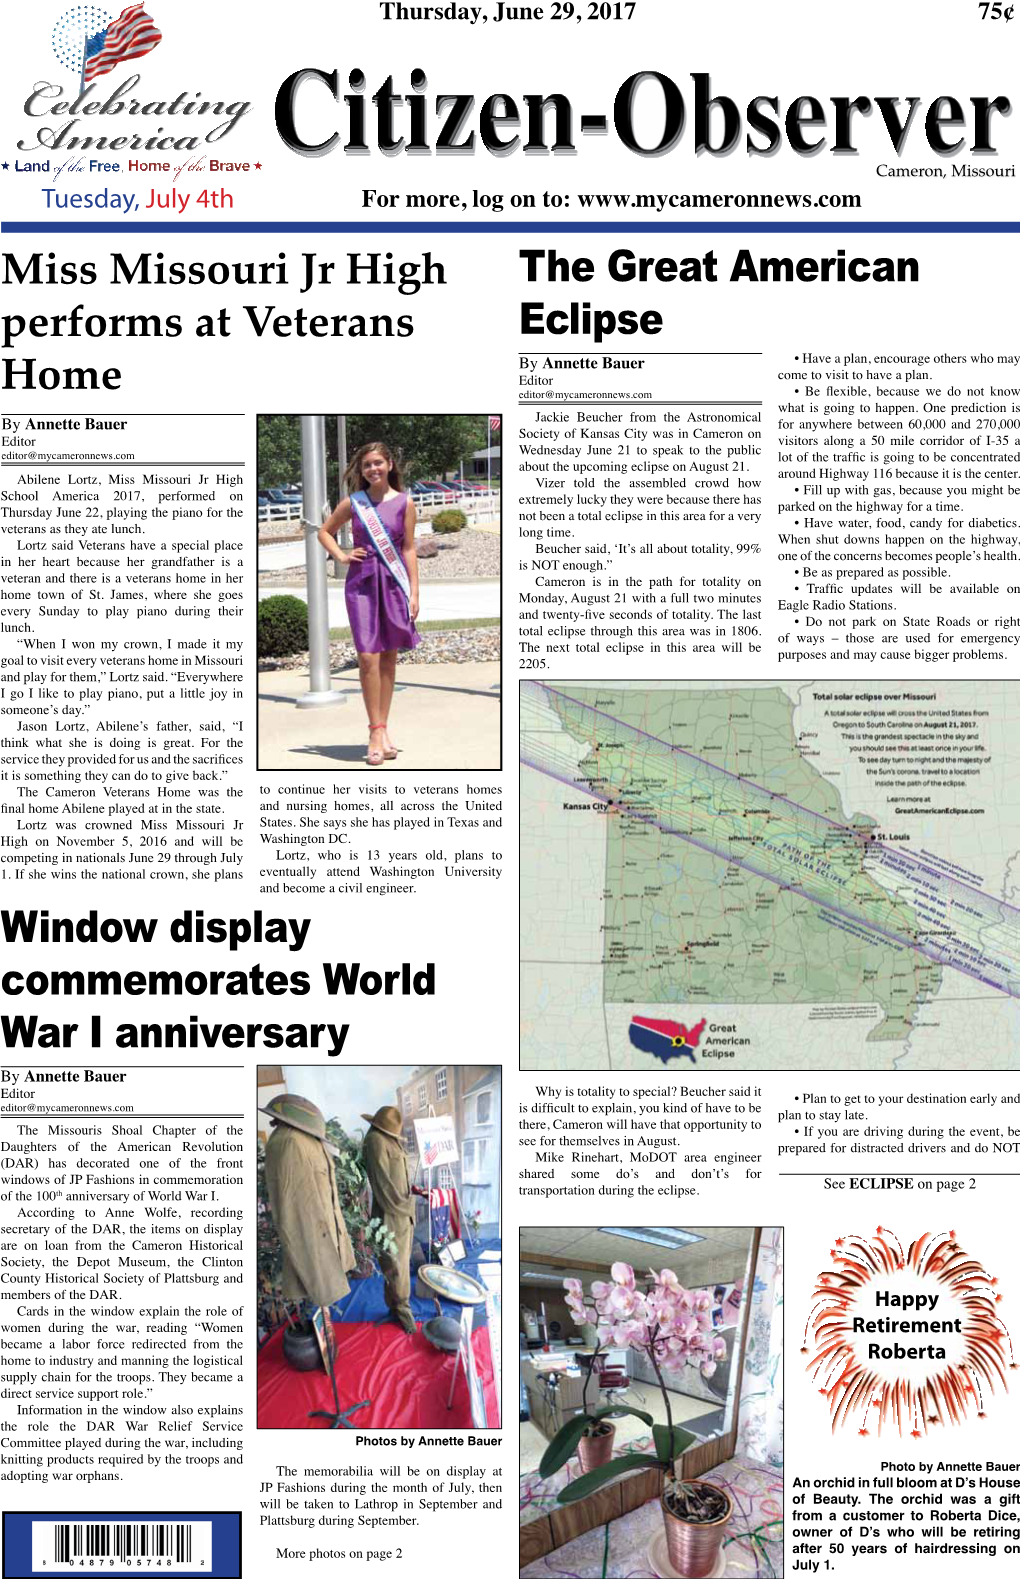 Miss Missouri Jr High Performs at Veterans Home Window Display Commemorates World War I Anniversary the Great American Eclipse